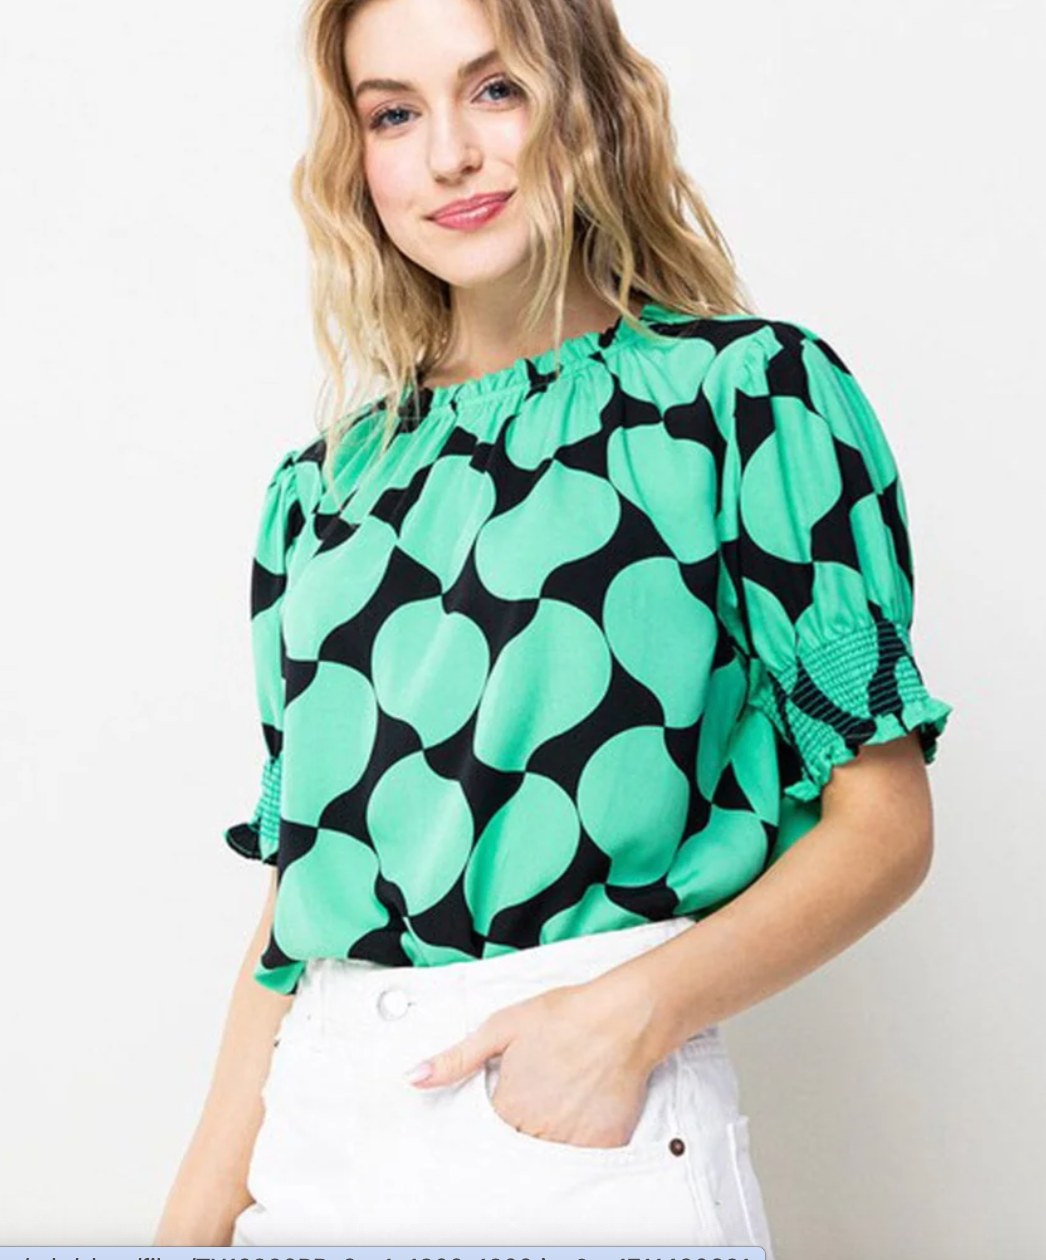 Emerald Charm: Women's Short Smock Sleeve Tunic Printed Blouse Top in Green